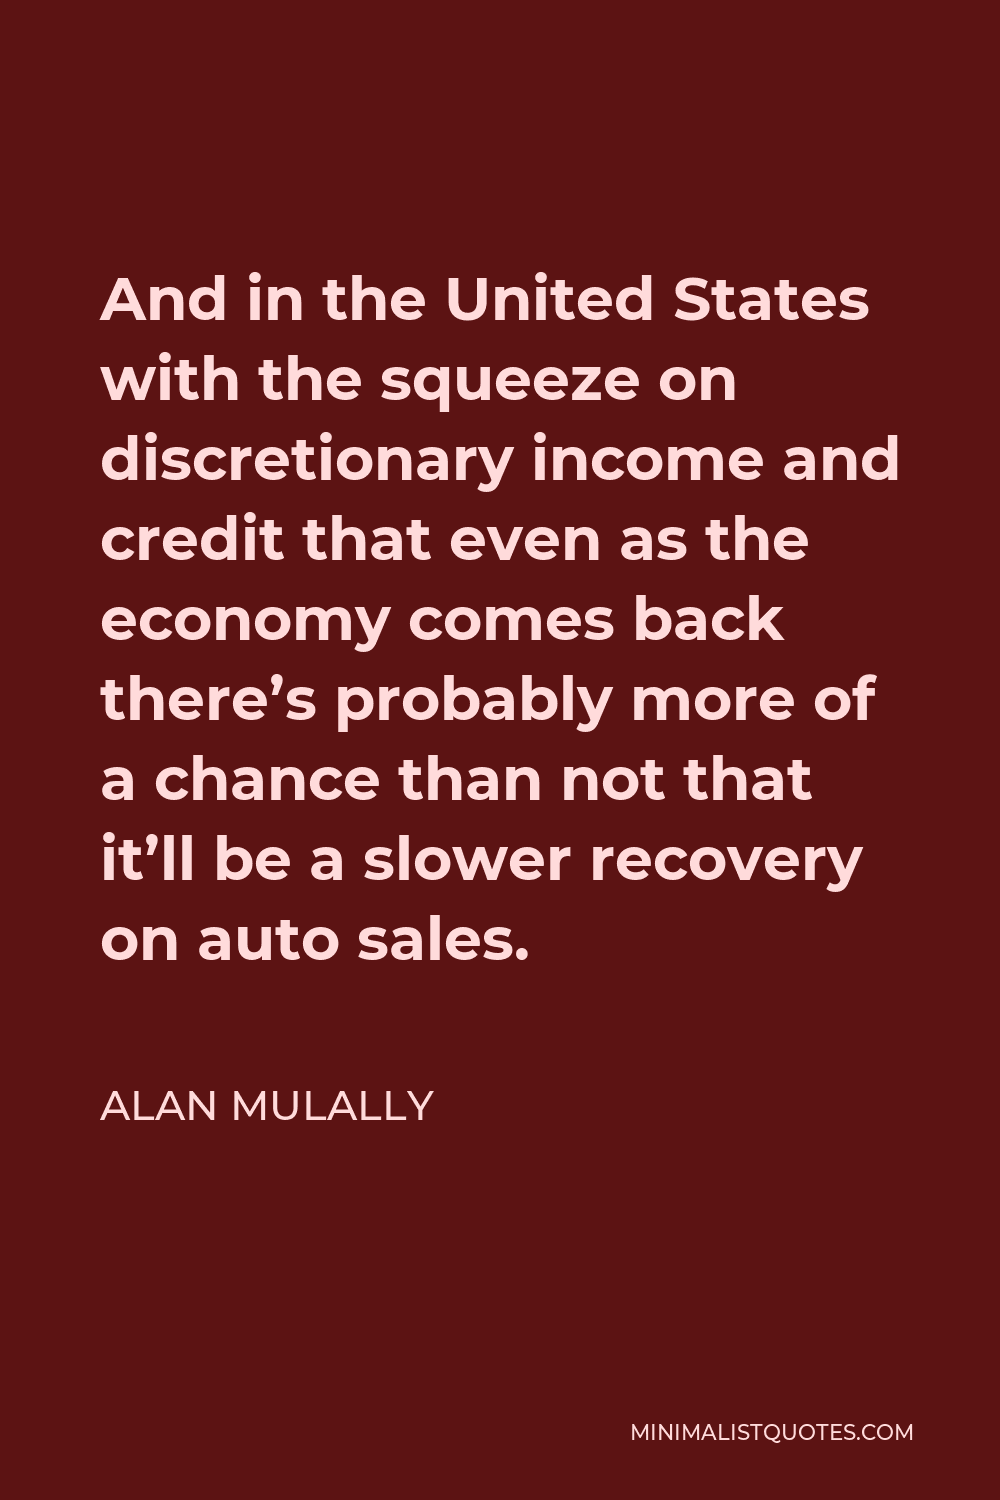 Alan Mulally Quote - And in the United States with the squeeze on discretionary income and credit that even as the economy comes back there’s probably more of a chance than not that it’ll be a slower recovery on auto sales.